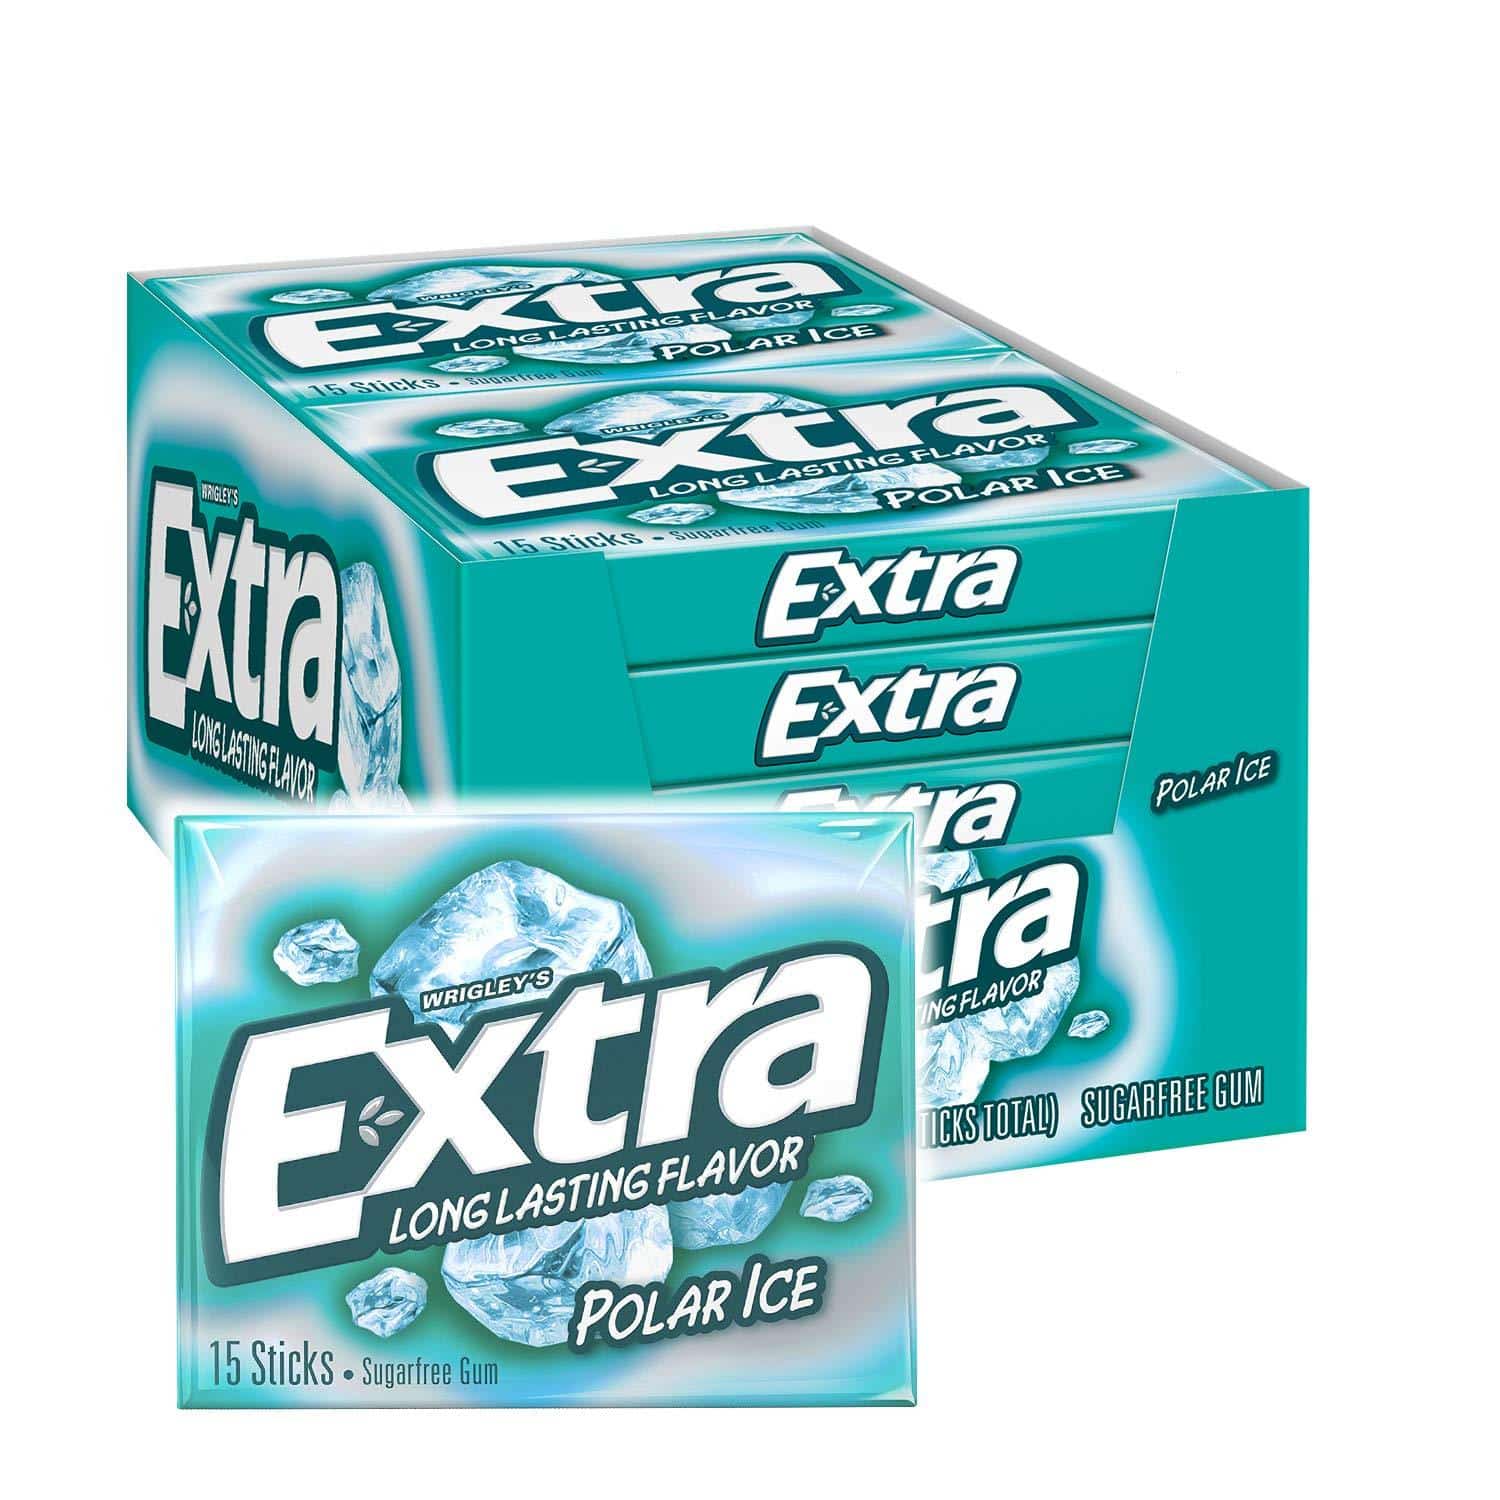 10 Pack of EXTRA Sugar Free Gum for $5.24